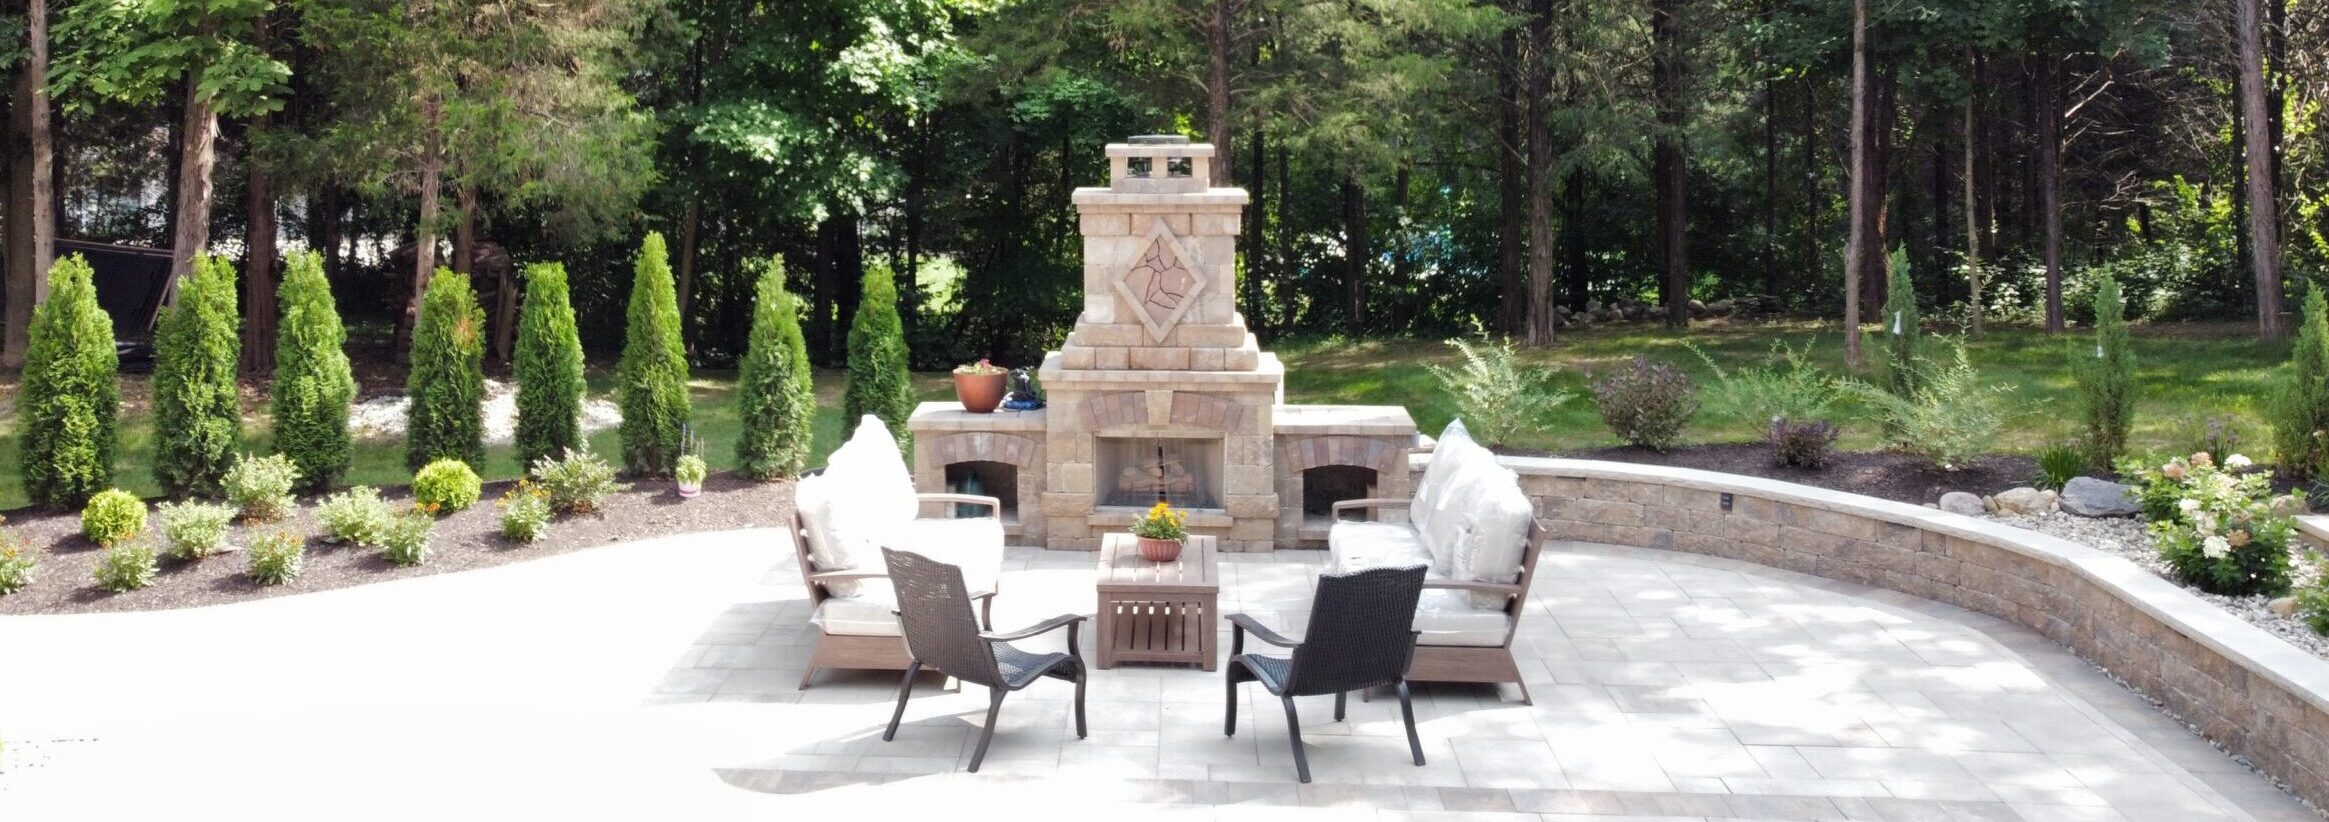 Completed stone patio and landscape featuring an outdoor fireplace